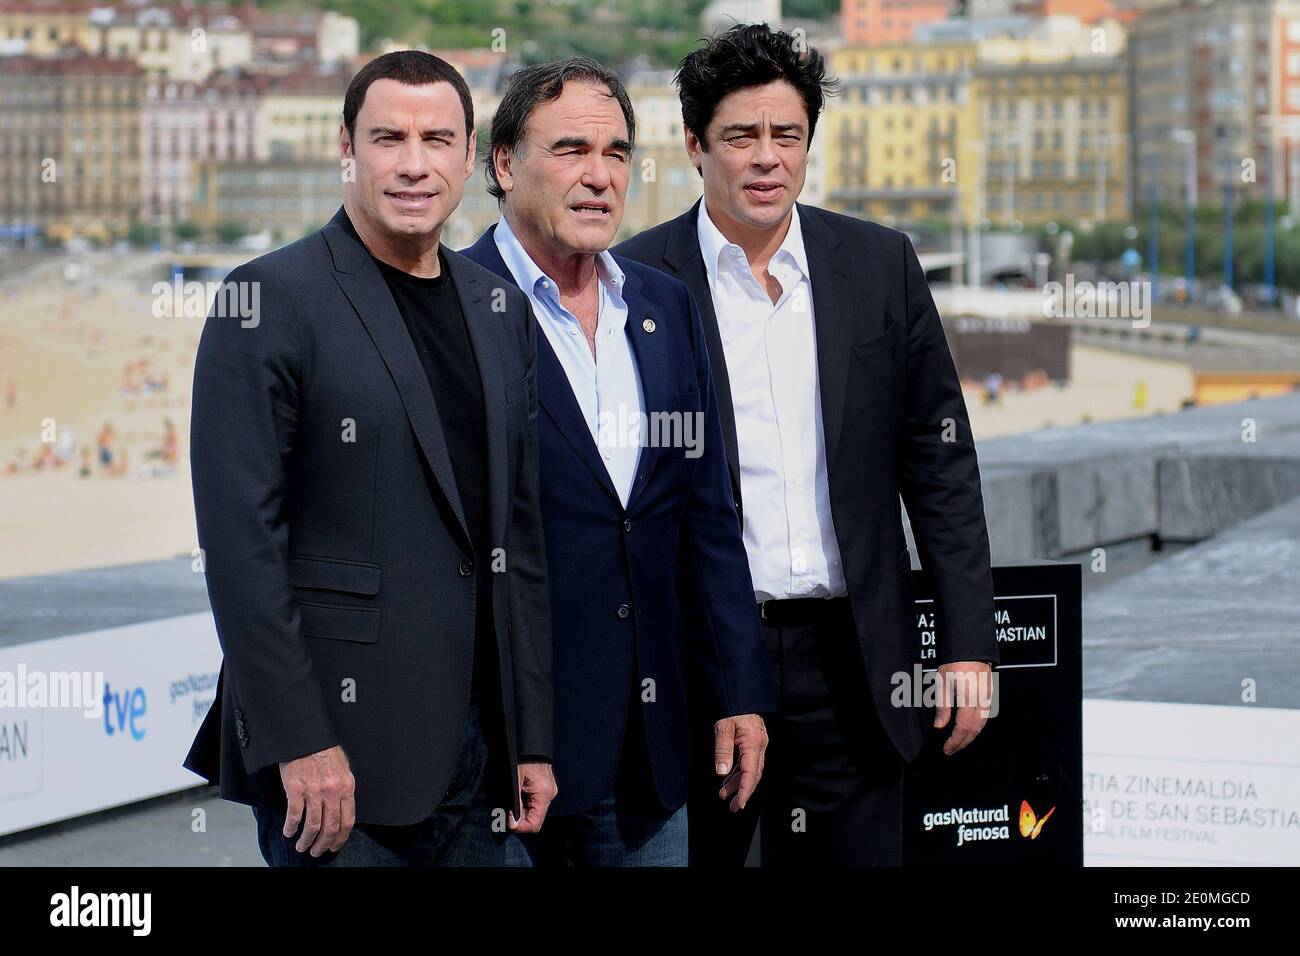 Oliver Stone (C)with actors Benicio del Toro (L) and John Travolta (R) attend the photocall for 'Savages' at San Sebastian Film Festival in San Sebastian, Spain on September 22, 2012. Photo by Julien Pascual/Photomobile/ABACAPRESS.COM Stock Photo